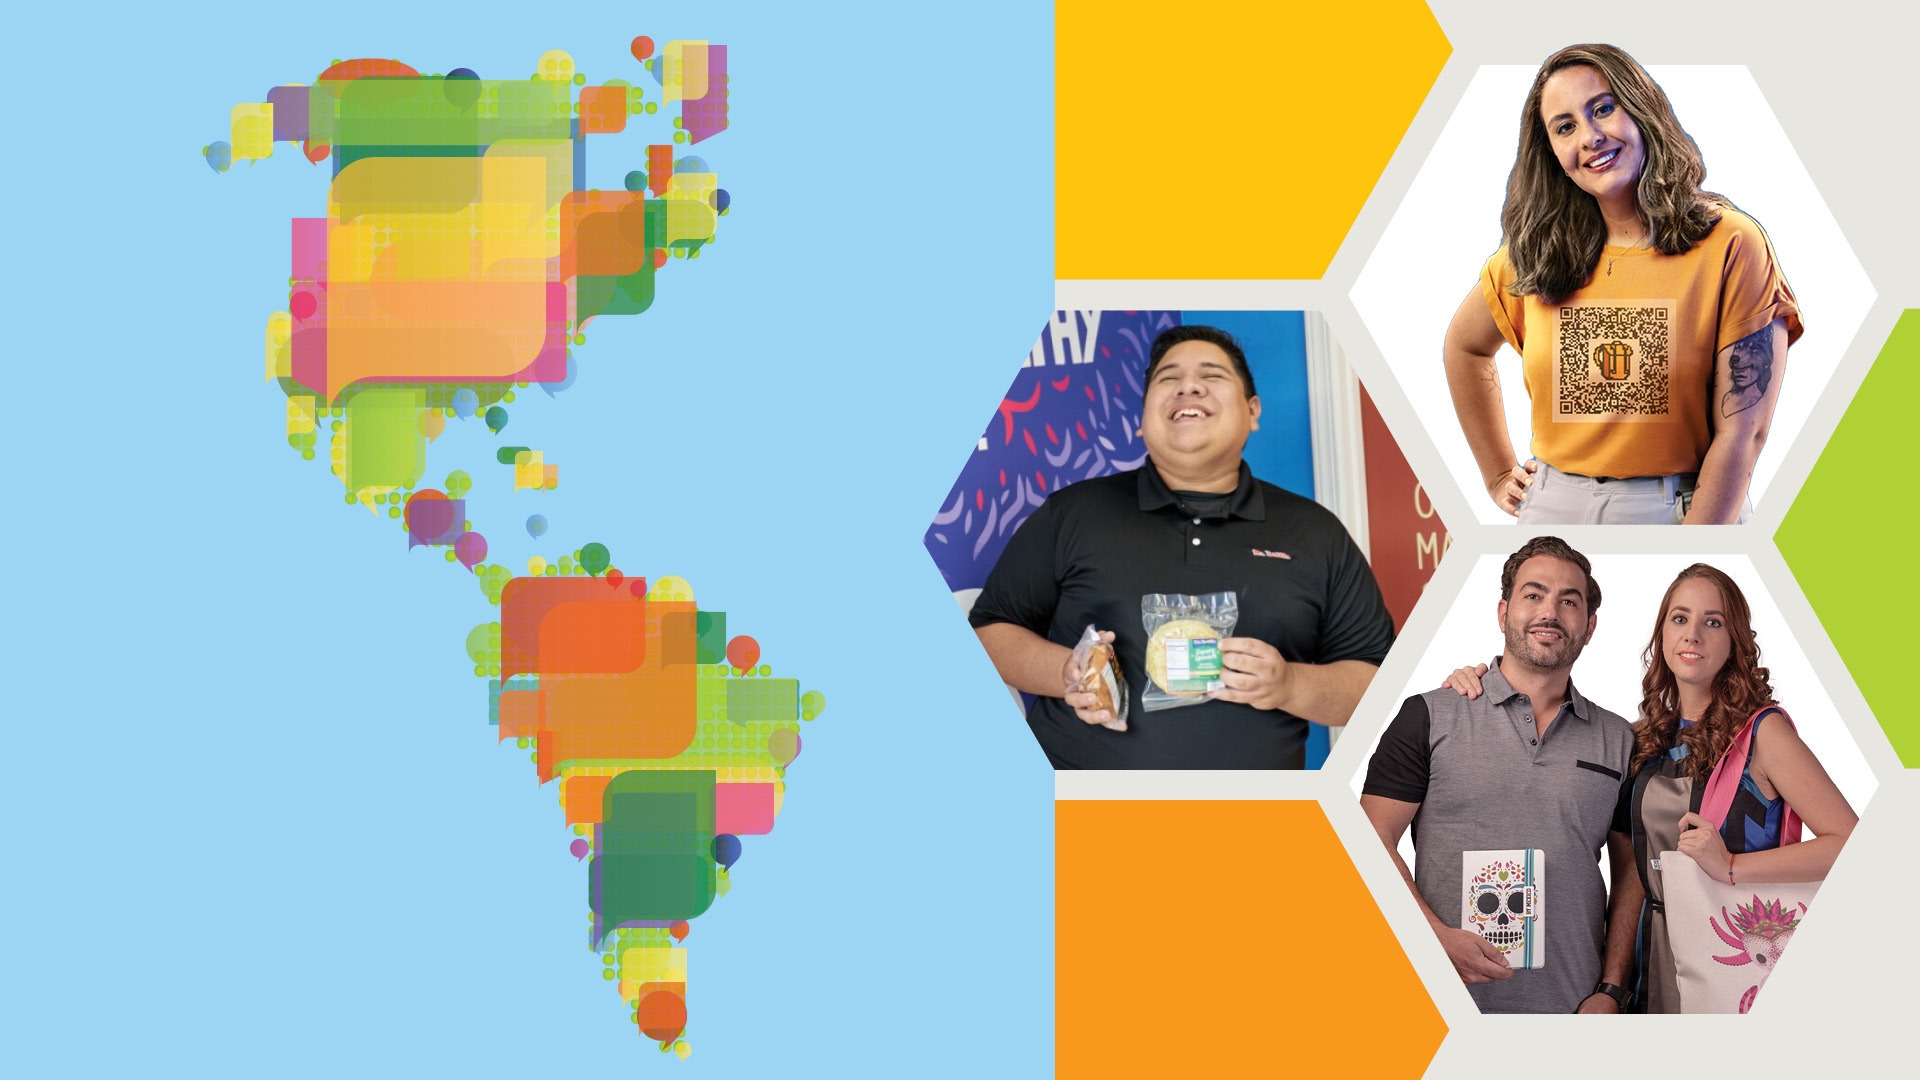 A graphic of North and South America alongside three different Amazon sellers holding their products.